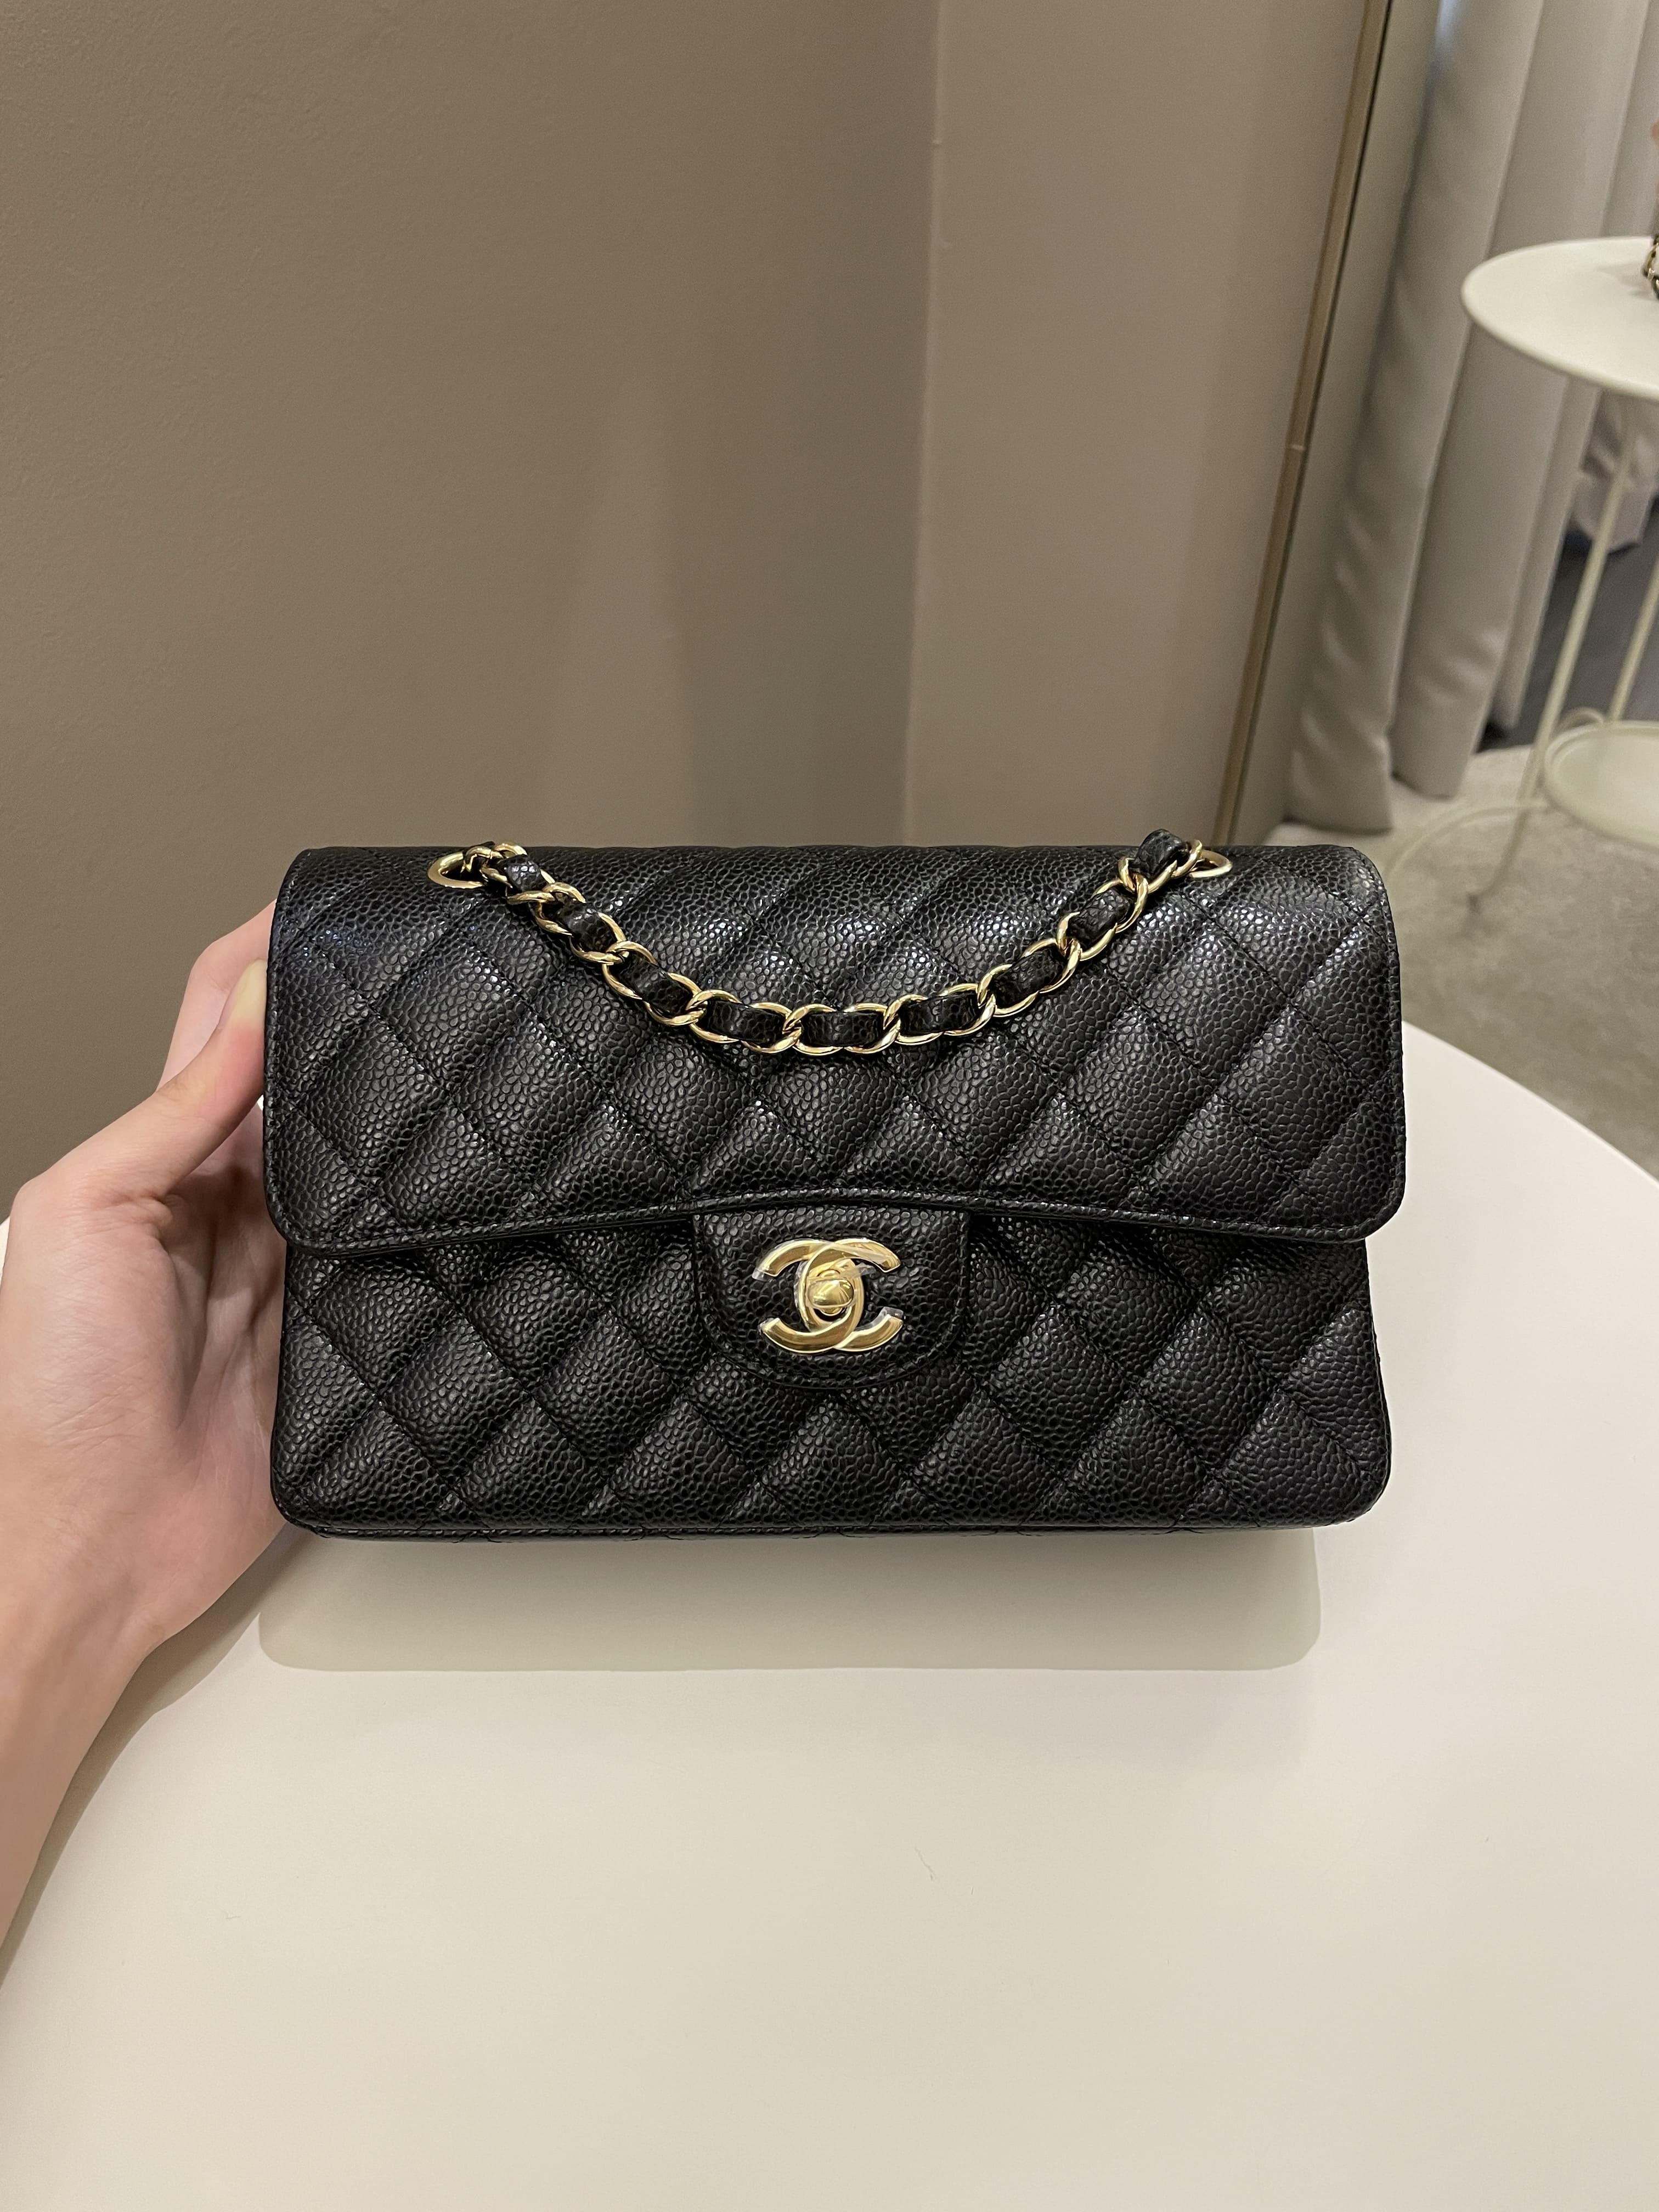 Chanel Black Leather Small Classic Double Flap Shoulder Bag Chanel | TLC